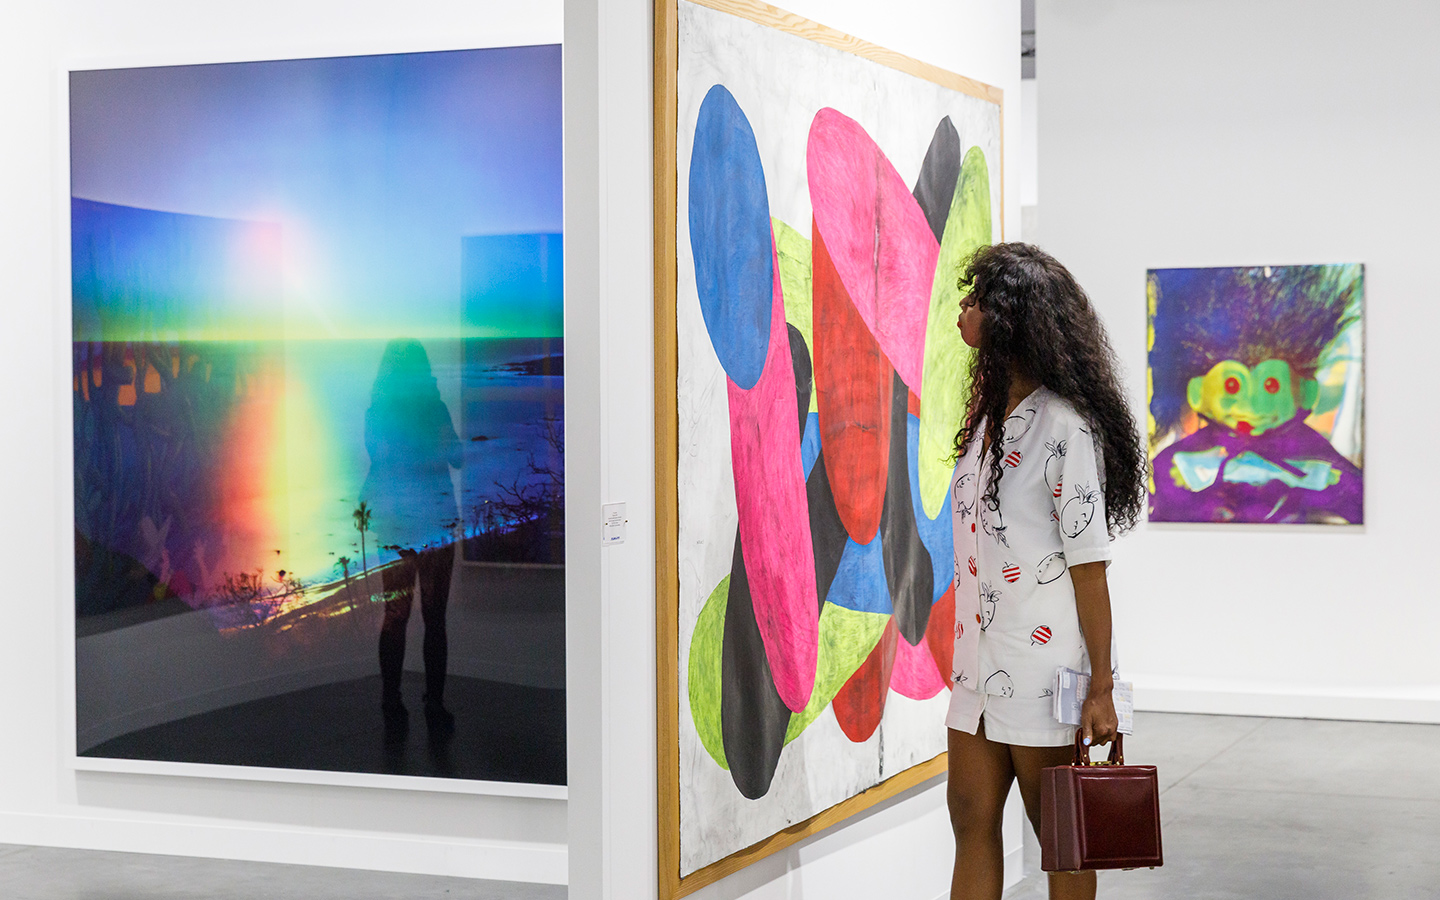 Art Basel and Miami Art Week 2019: Highlights from the Hottest